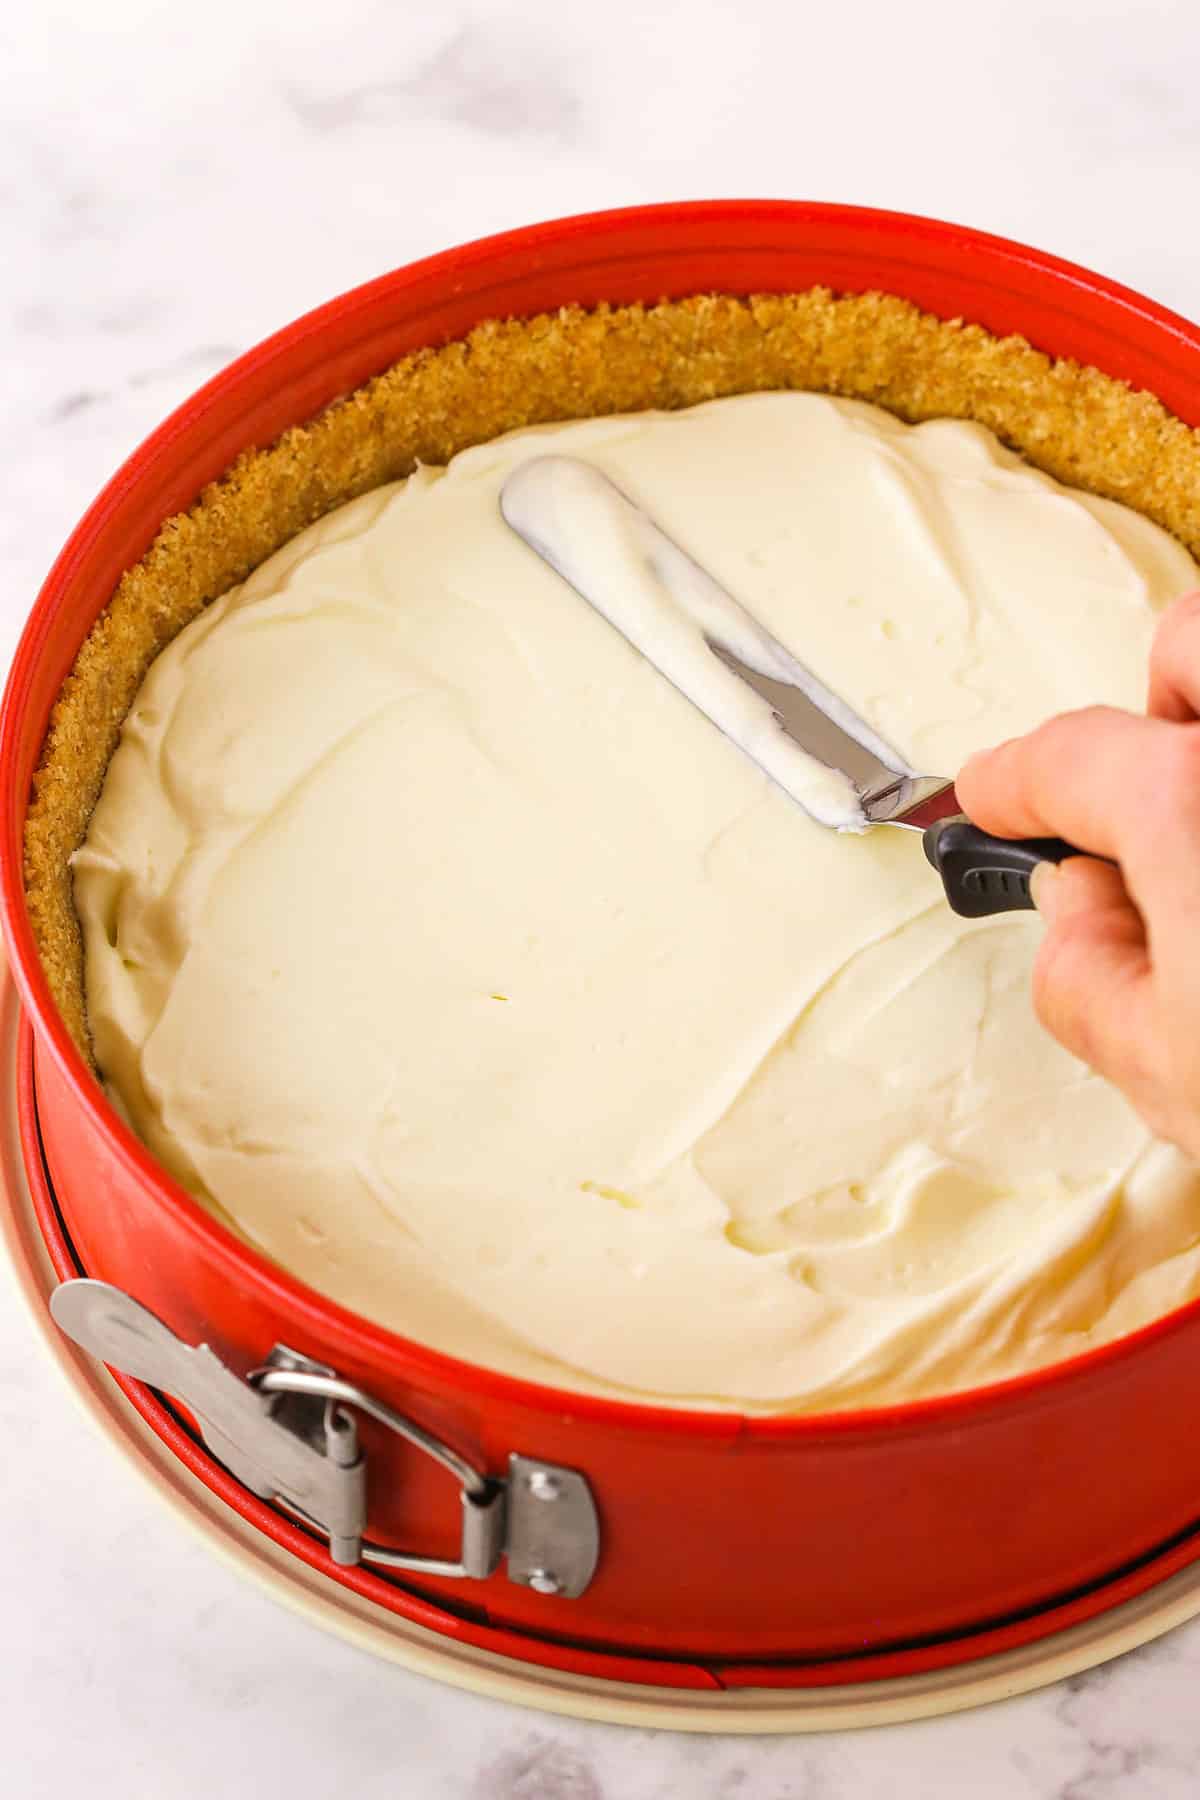 A step in making No Bake Cherry Almond Cheesecake showing spreading the almond filling evenly into the chilled crust, in the springform pan, using an offset spatula